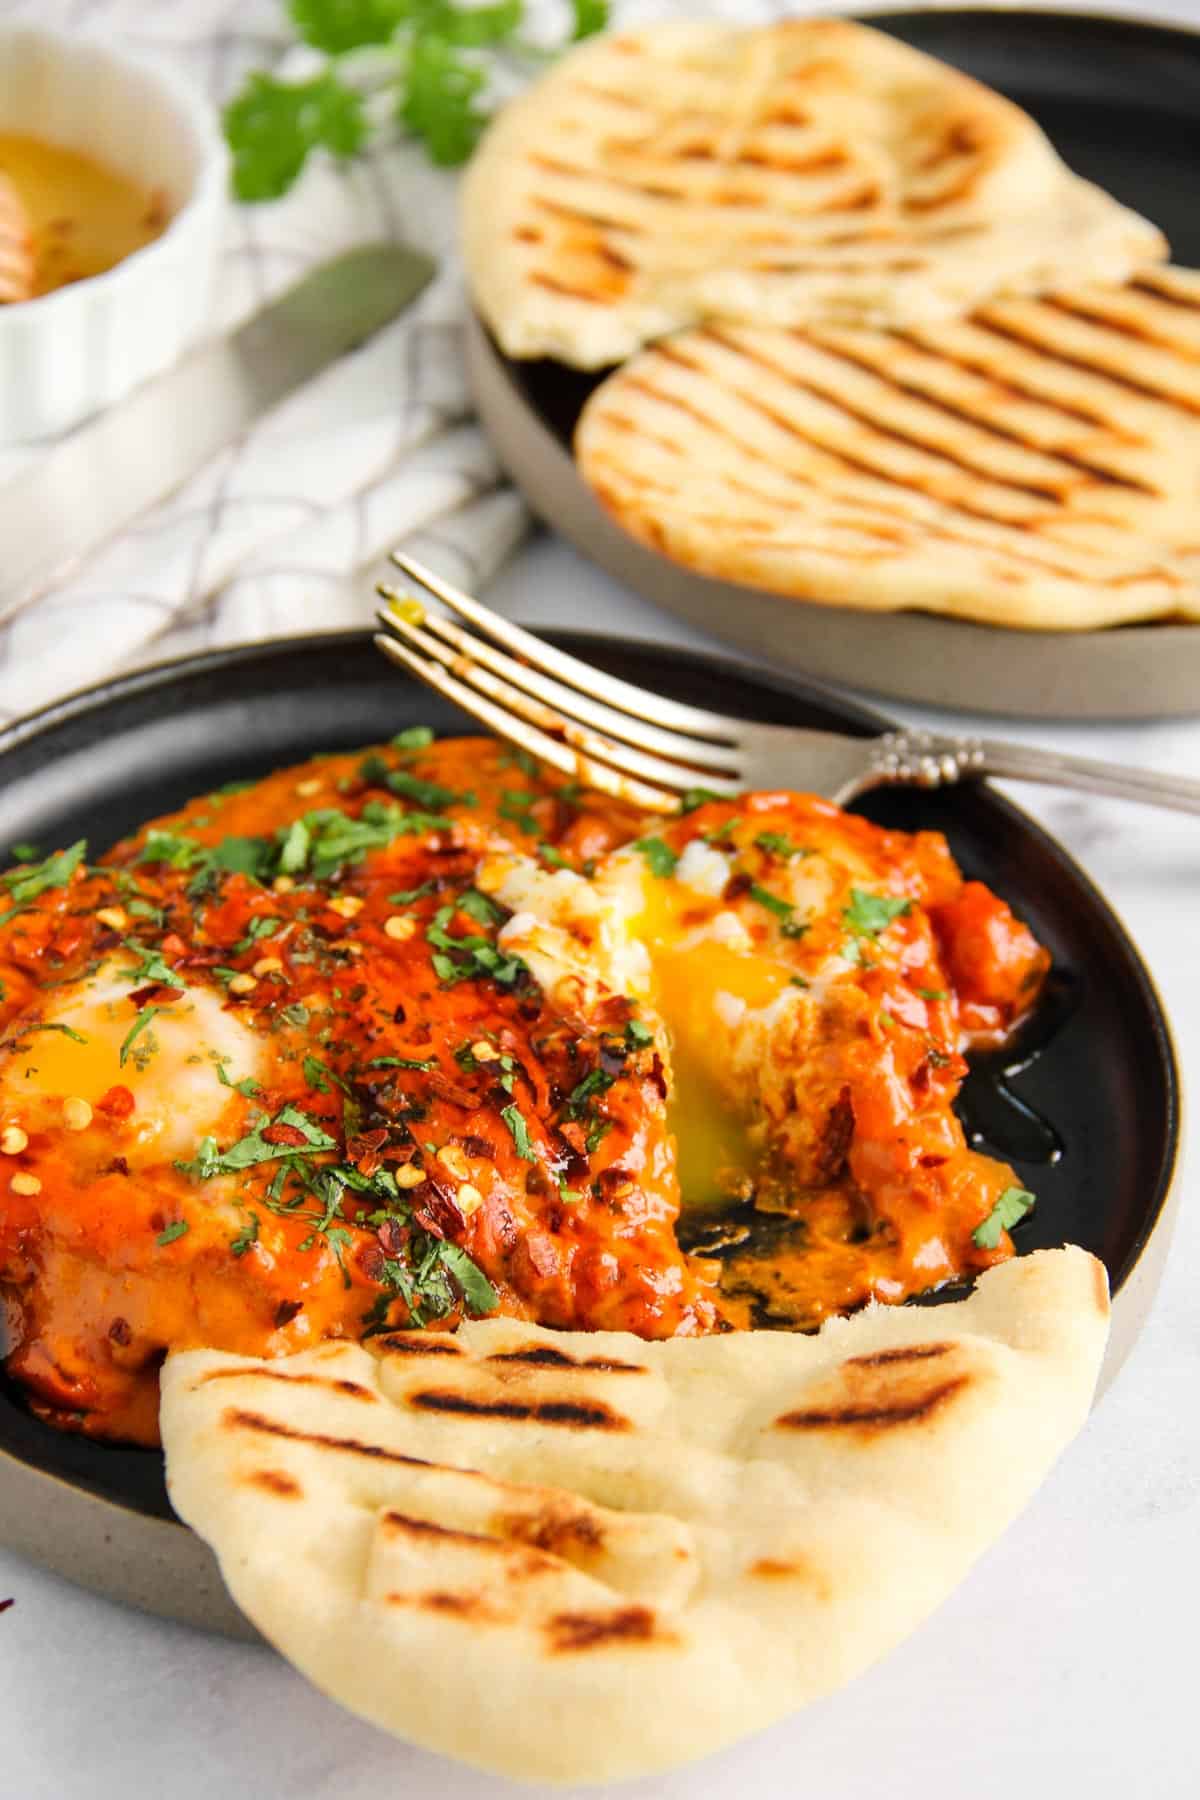 makhani shakshuka served in a black plate with naan